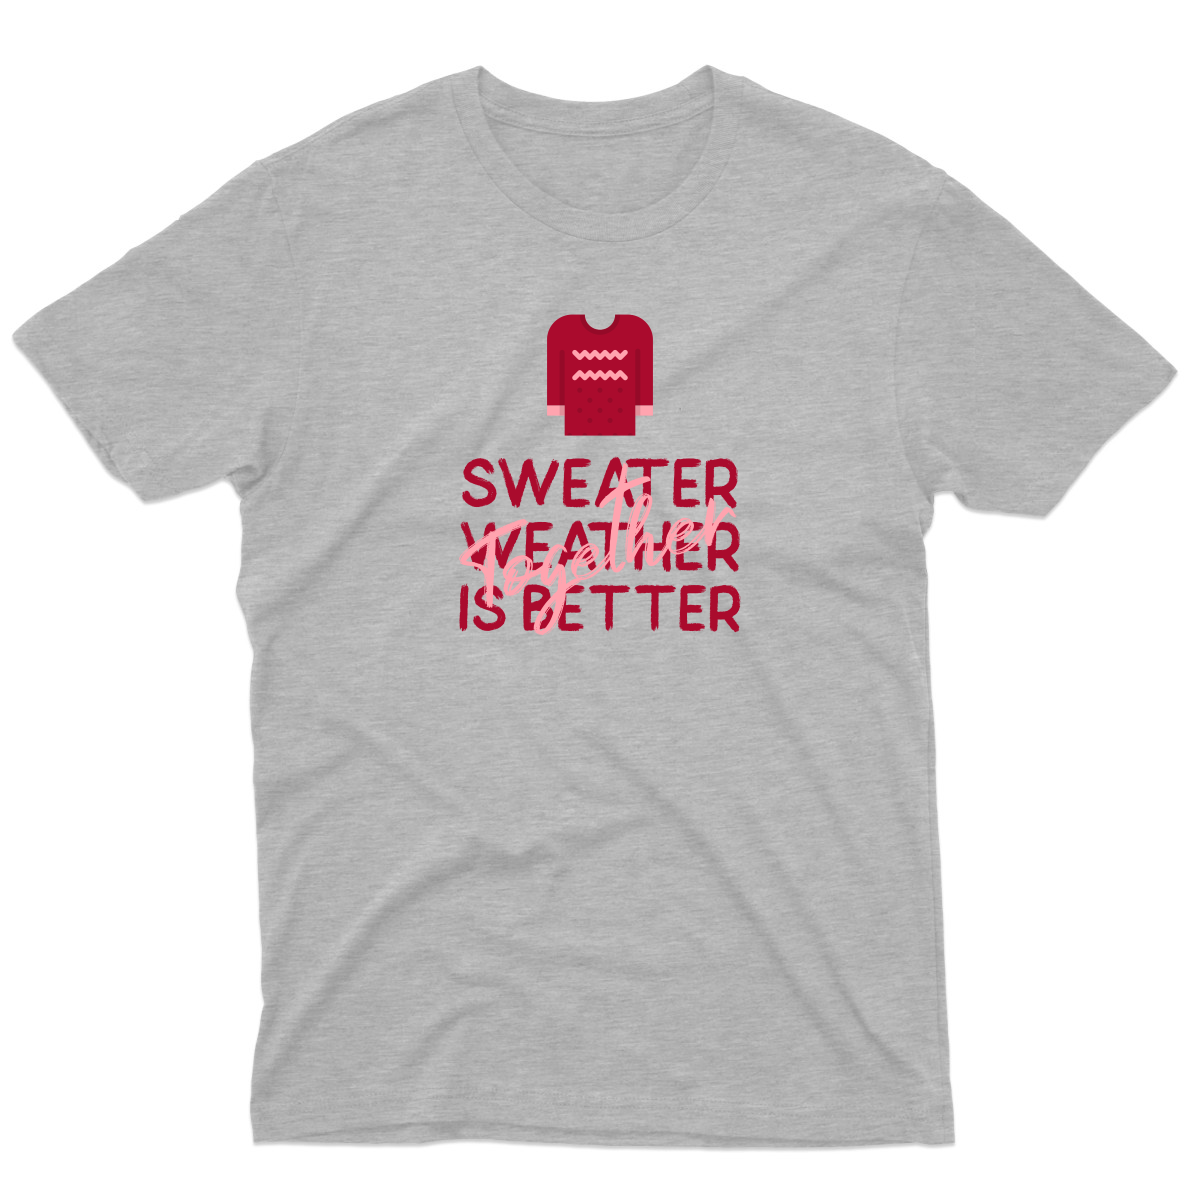 Sweather Weather is Better Together Men's T-shirt | Gray